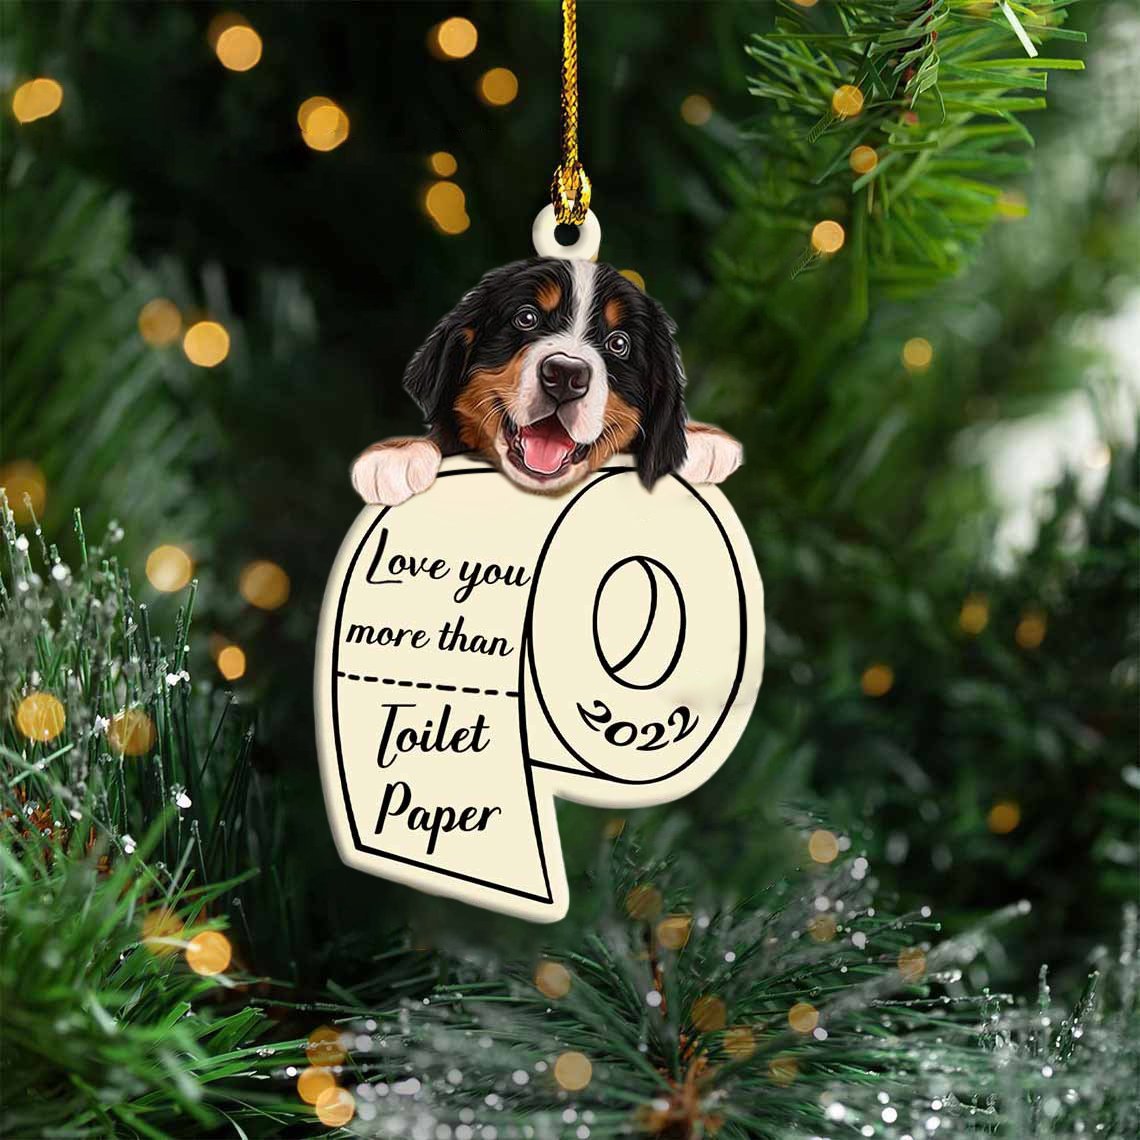 Bernese Mountain Dog Love You More Than Toilet Paper 2022 Hanging Ornament